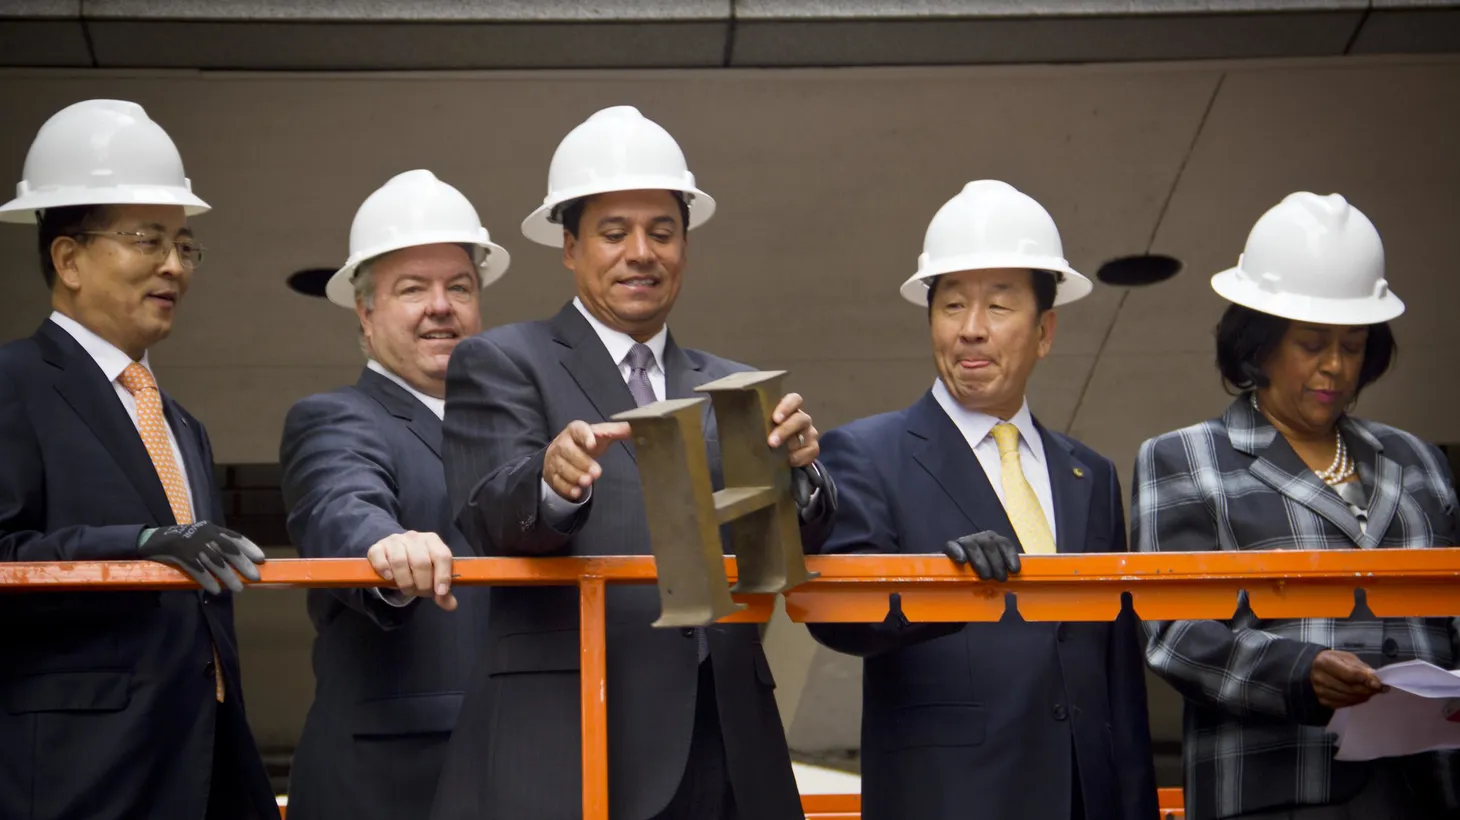 Then-LA City Councilman Jose Huizar (center) attended the Wilshire Grand Hotel demolition event in 2012 and removed the hotel's iconic lettering above the Wilshire Boulevard entrance.